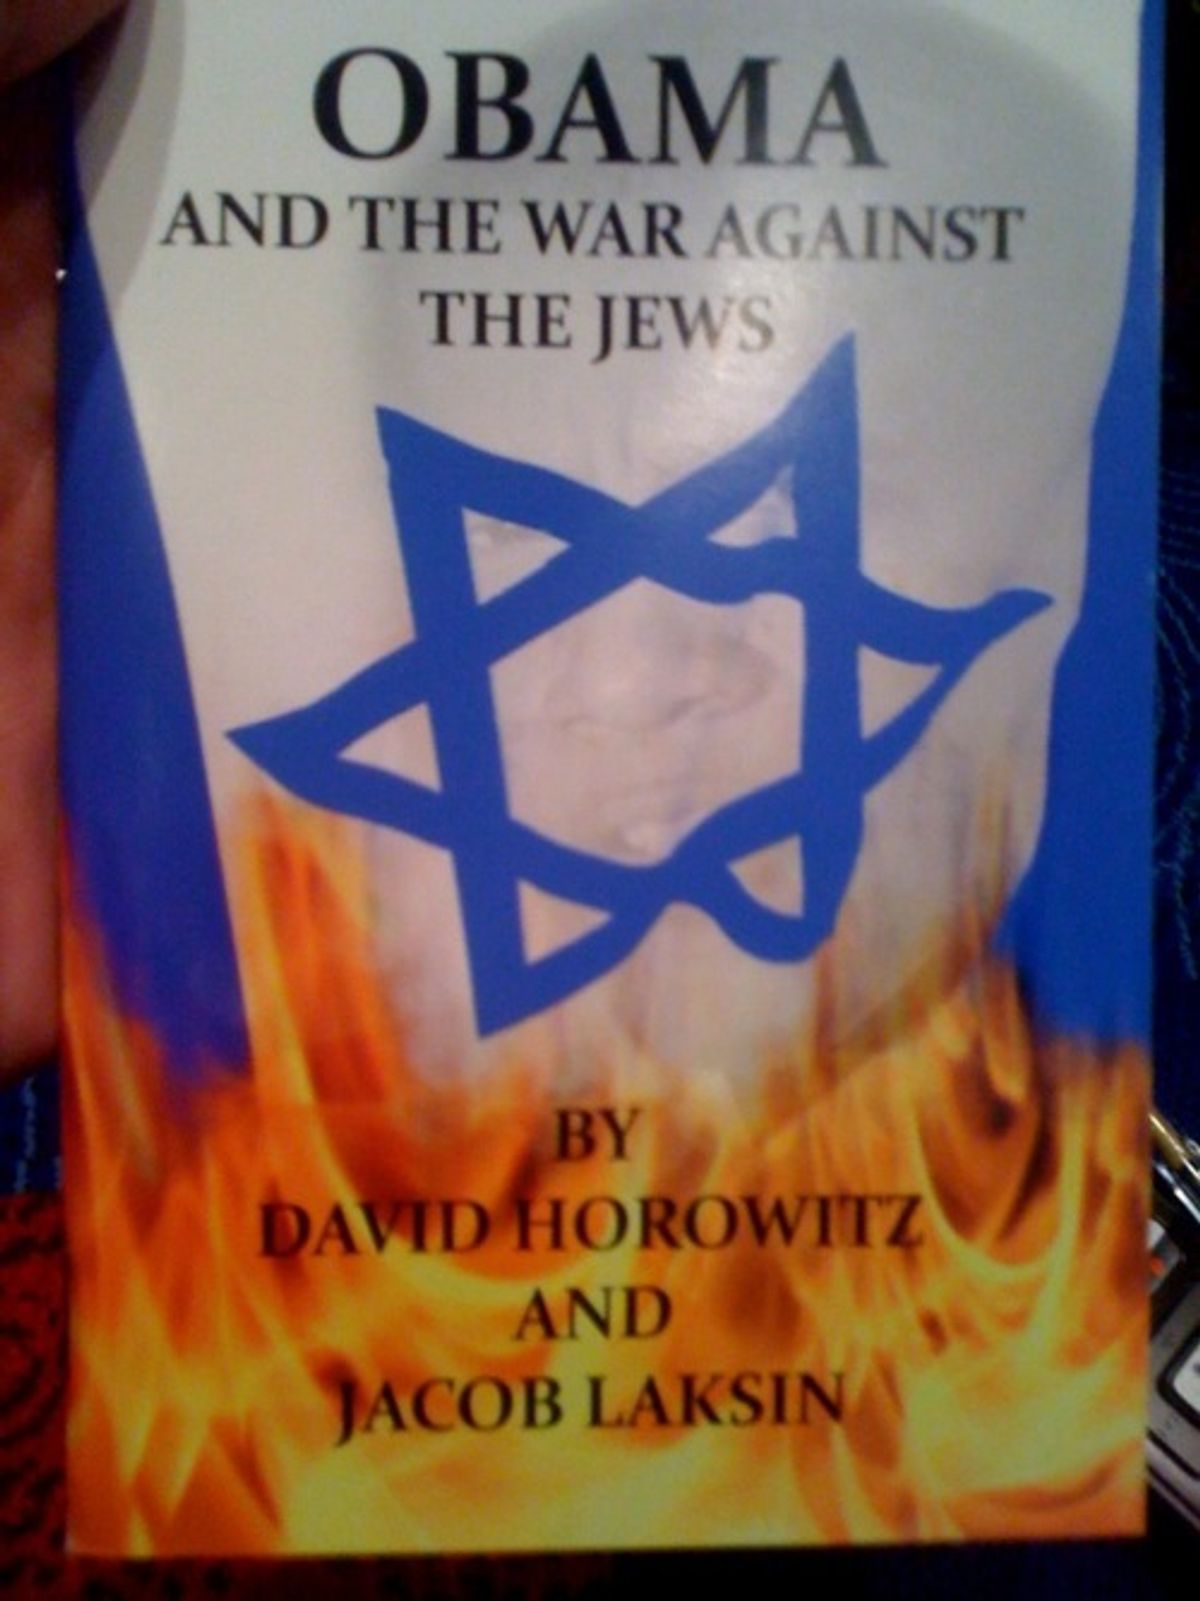 The cover of a book by David Horowitz being handed out at CPAC 2011.